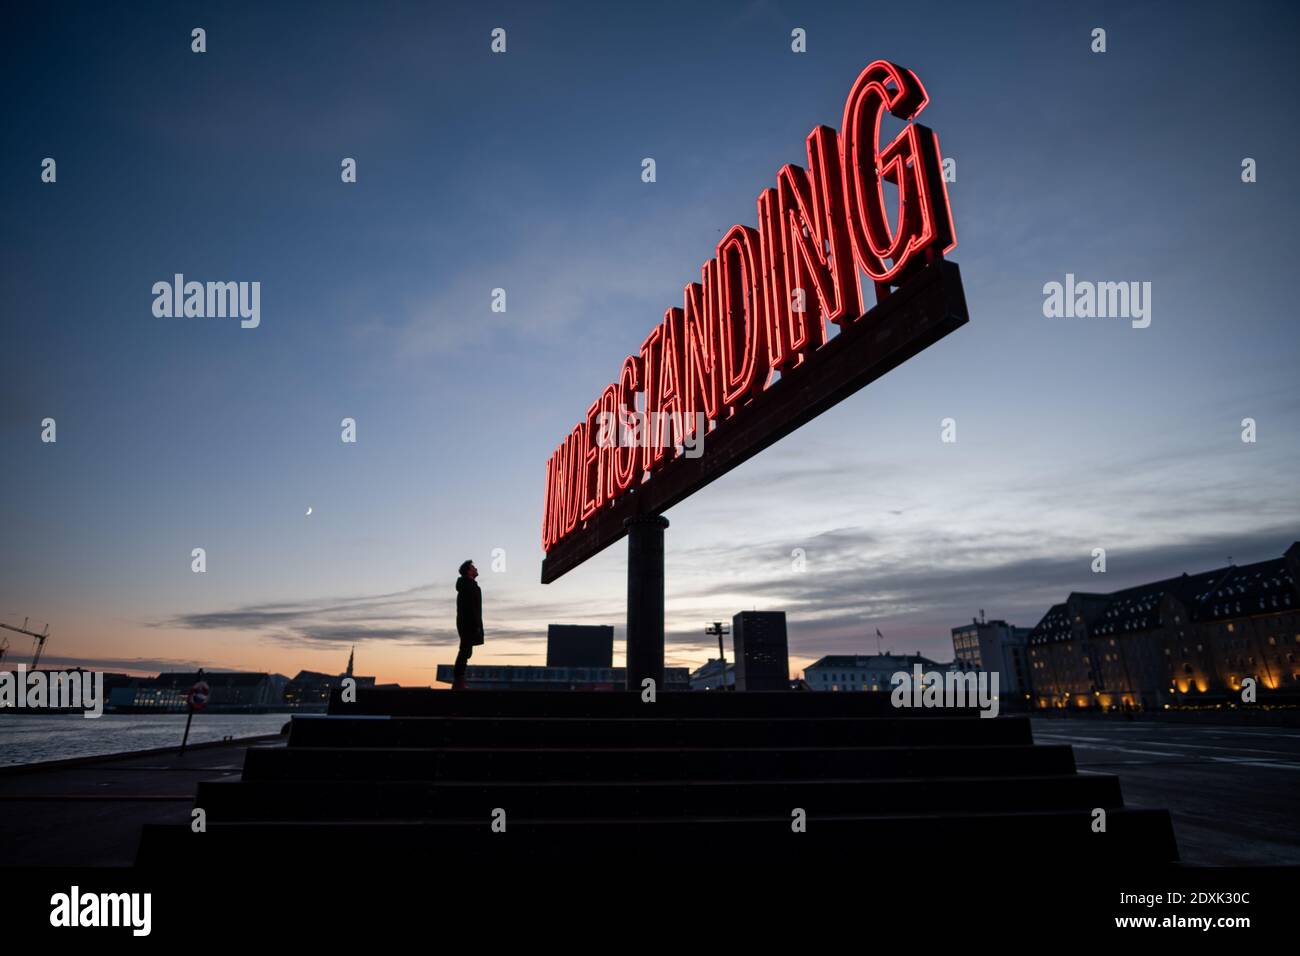 Copenhagen, Denmark. 18th, December 2020. The neon sculpture Understanding by Turner Prize- winning artist Martin Creed at Ofelia Plads in Copenhagen. The 8-metre tall and 15-metre long artwork is put up by Roskilde Festival and calls for hope and understanding in a time that is difficult for many. (Photo credit: Gonzales Photo - Kim M. Leland). Stock Photo